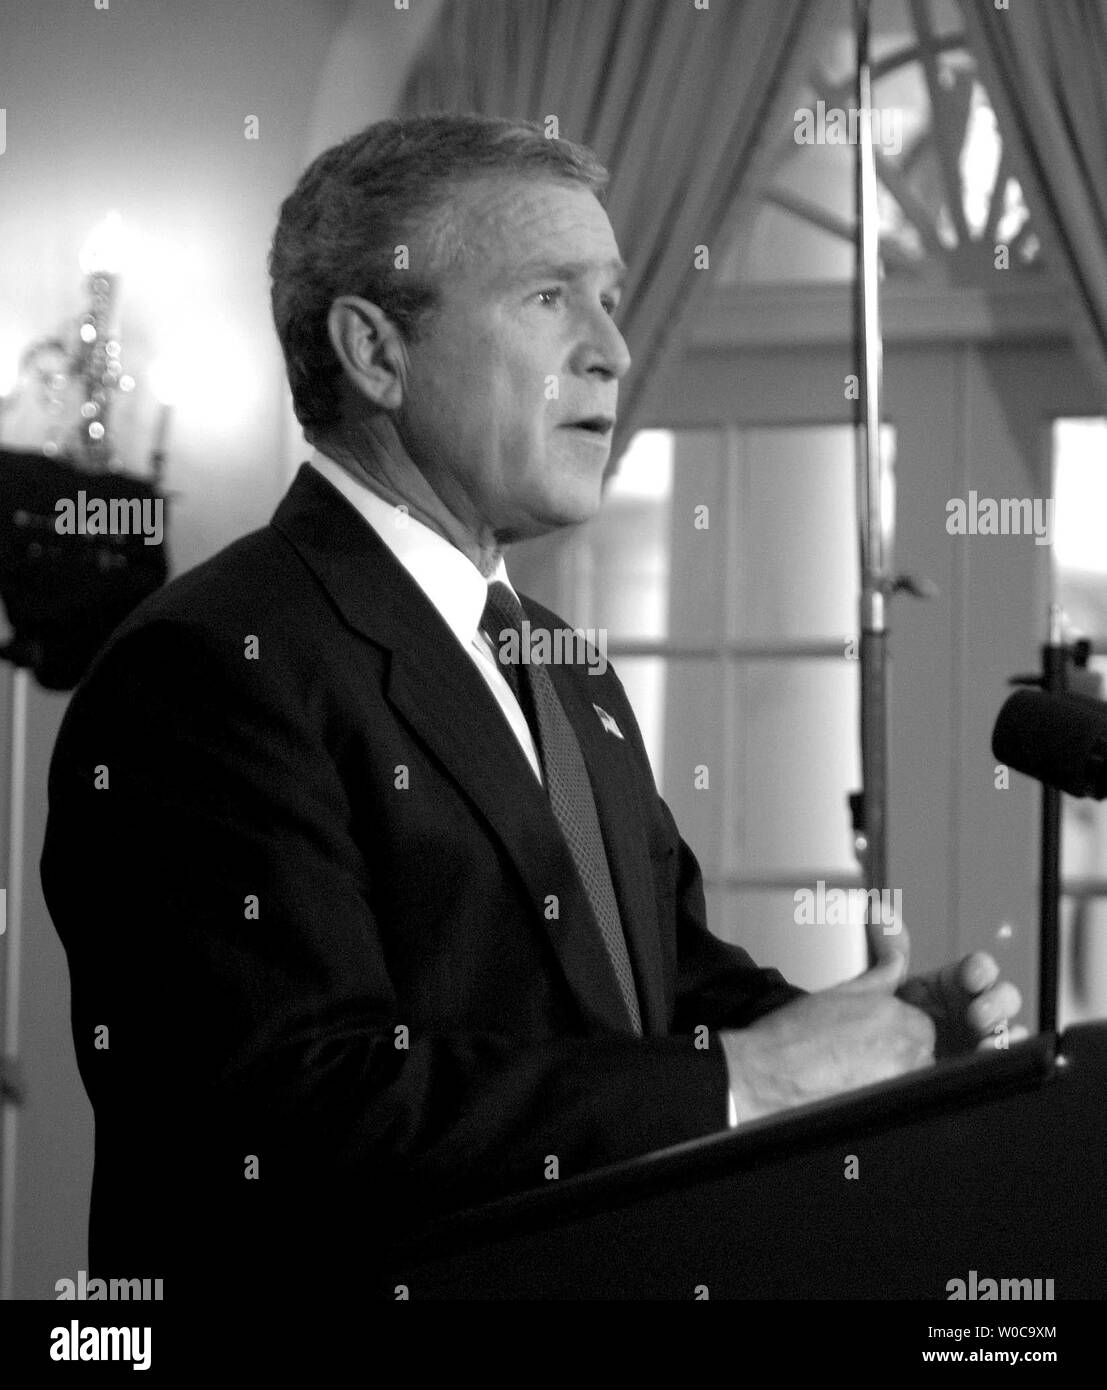 President George W. Bush addresses the nation from the White House to let the American people know that Saddam Hussein has been captured by the U.S. military, on December 14, 2003 in Washington.   The ex-Iraqi leader was hiding out near the town of Tikrit when he was captured.     (UPI Photo/Michael Kleinfeld) Stock Photo